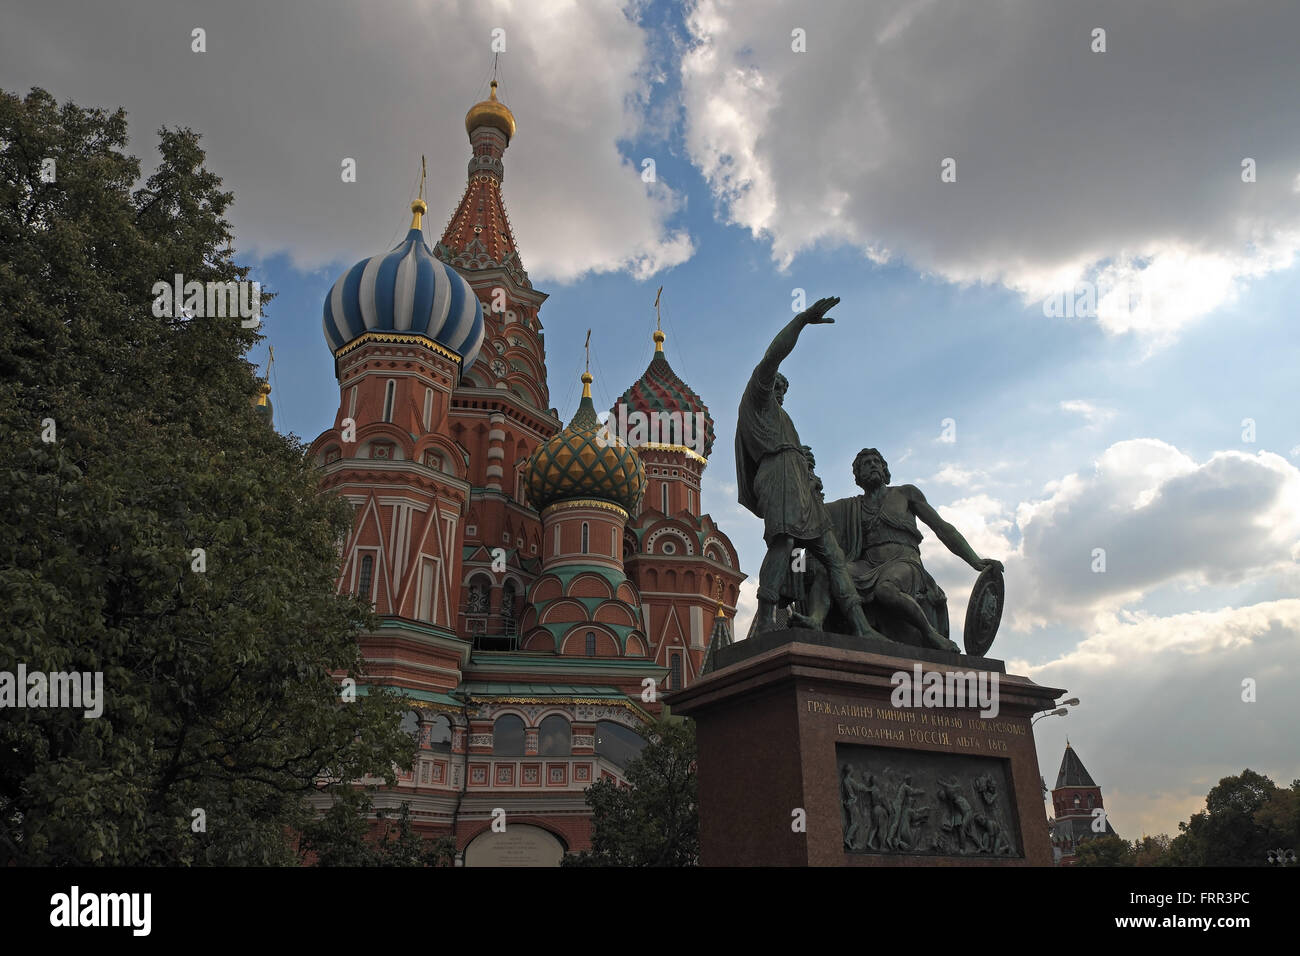 Statue of butcher Kuzma Mimin and Prince Dimitry Pozharsky, with St Basil's Cathedral beyond, Red Square, Moscow, Russia. Stock Photo